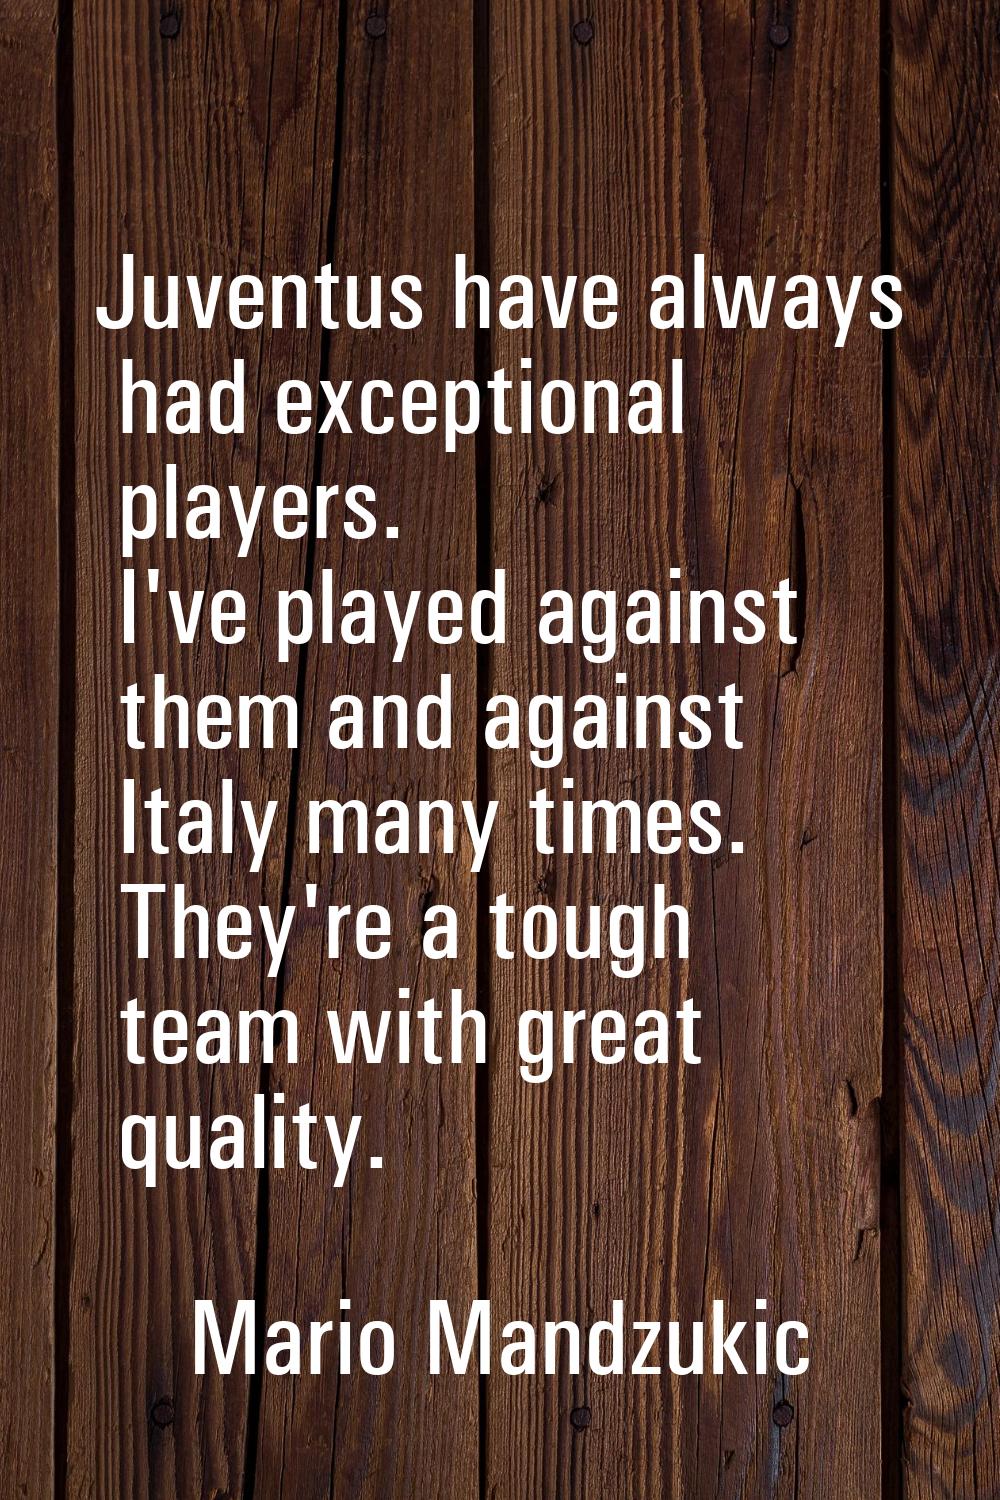 Juventus have always had exceptional players. I've played against them and against Italy many times